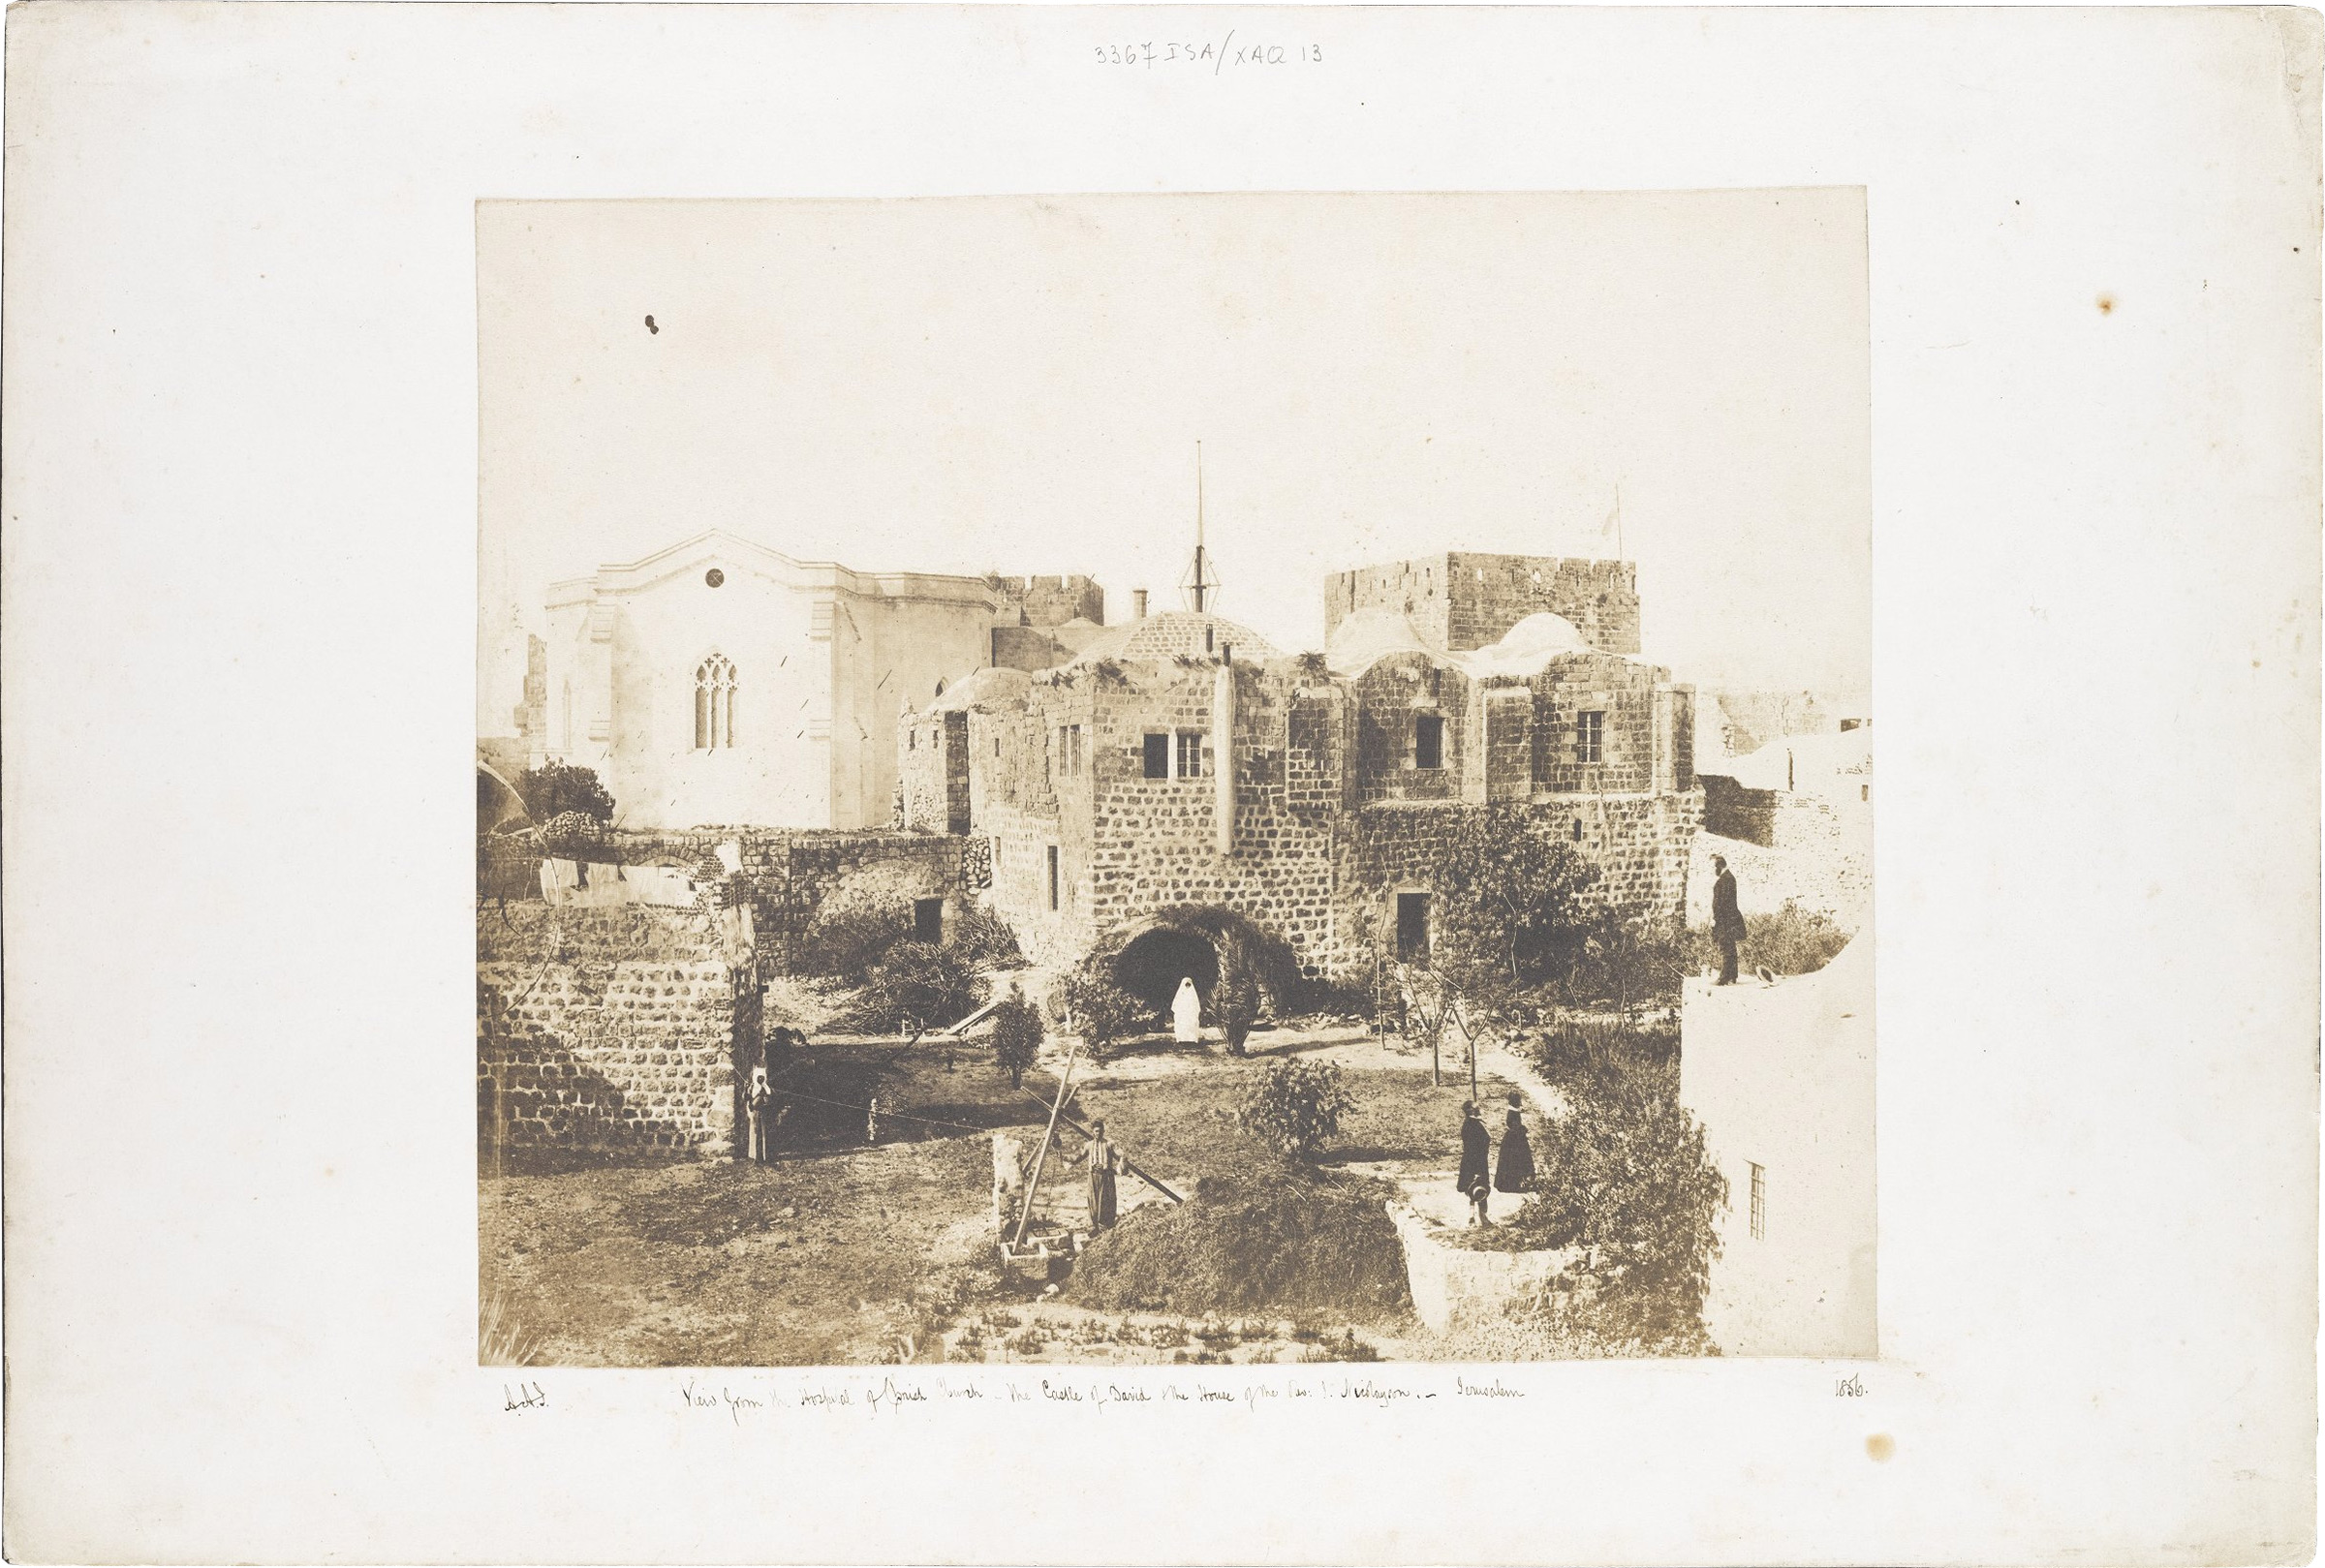 Photograph: View from the Hospital of Christ Church - The Castle of David and the House of the Rev. I. Nicolayson, 1856